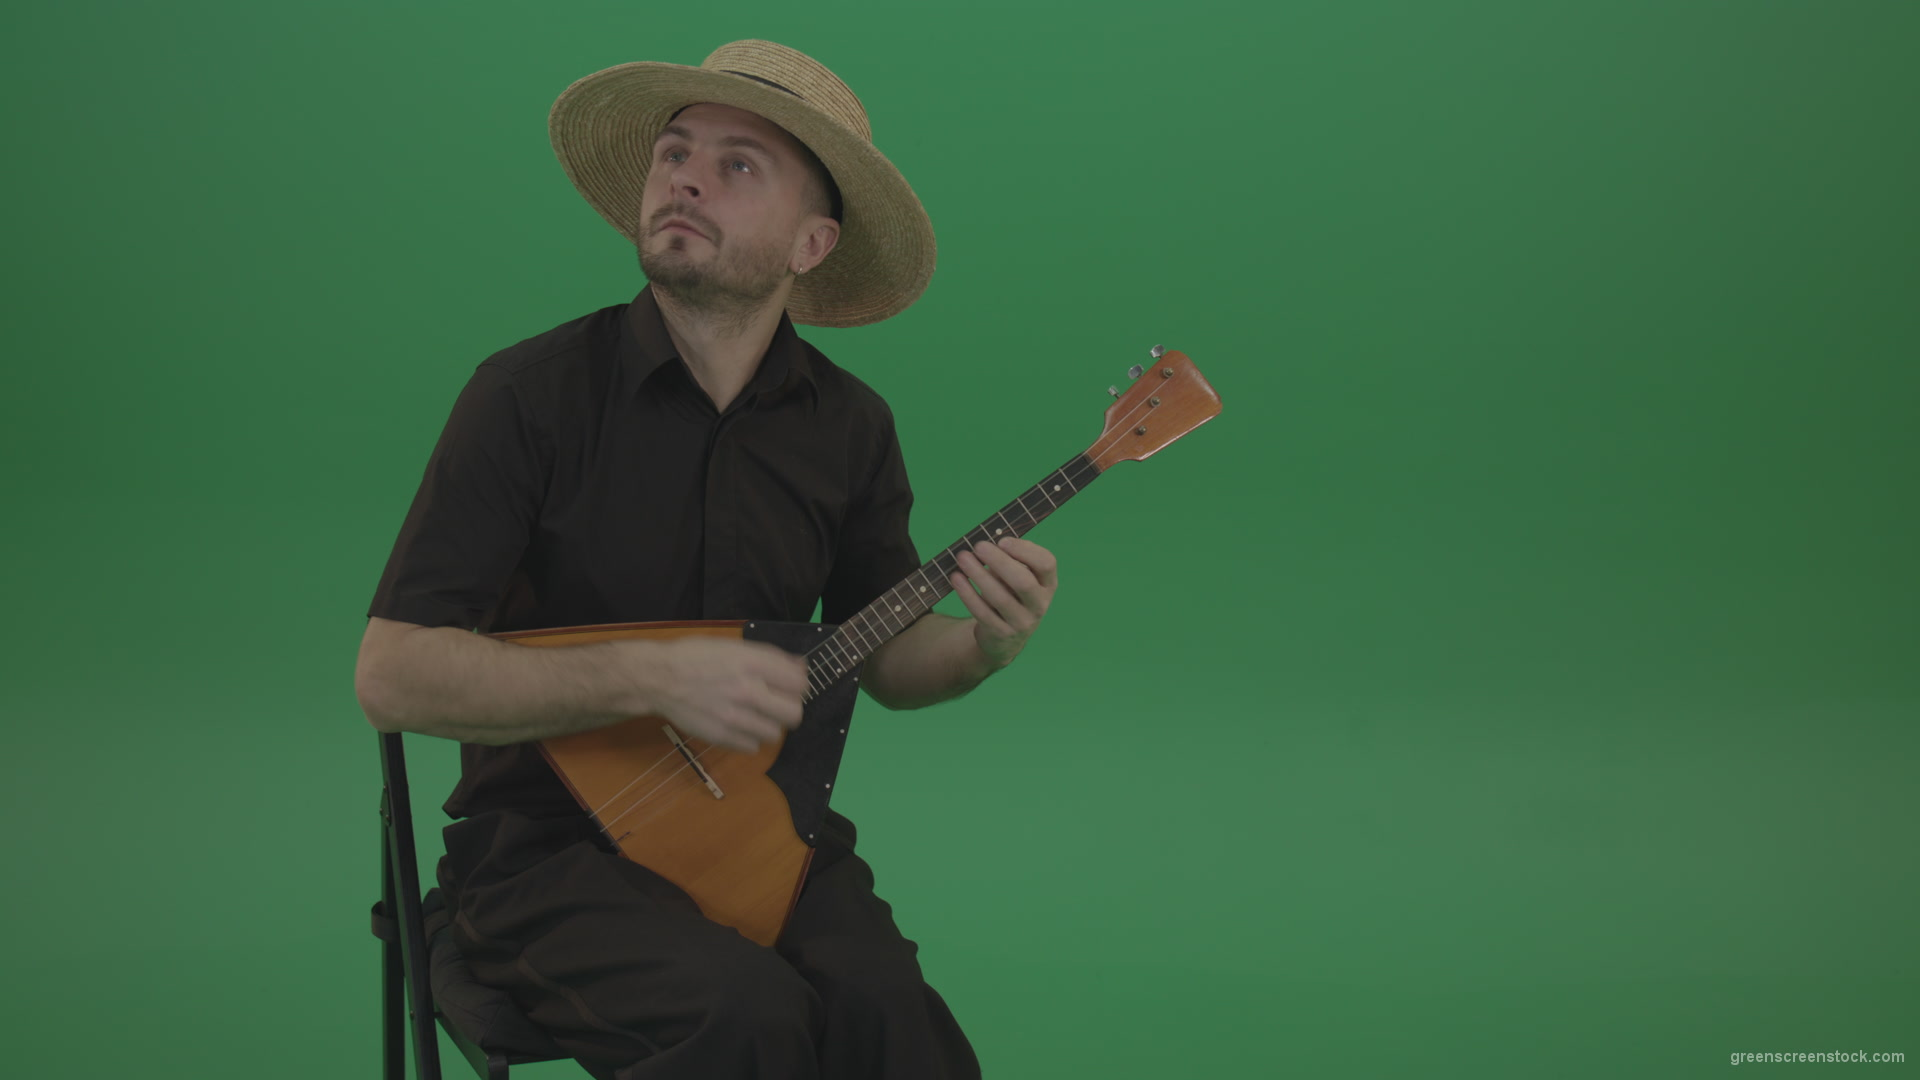 Man-from-village-play-Balalaika-music-instrument-isolated-on-green-screen_006 Green Screen Stock